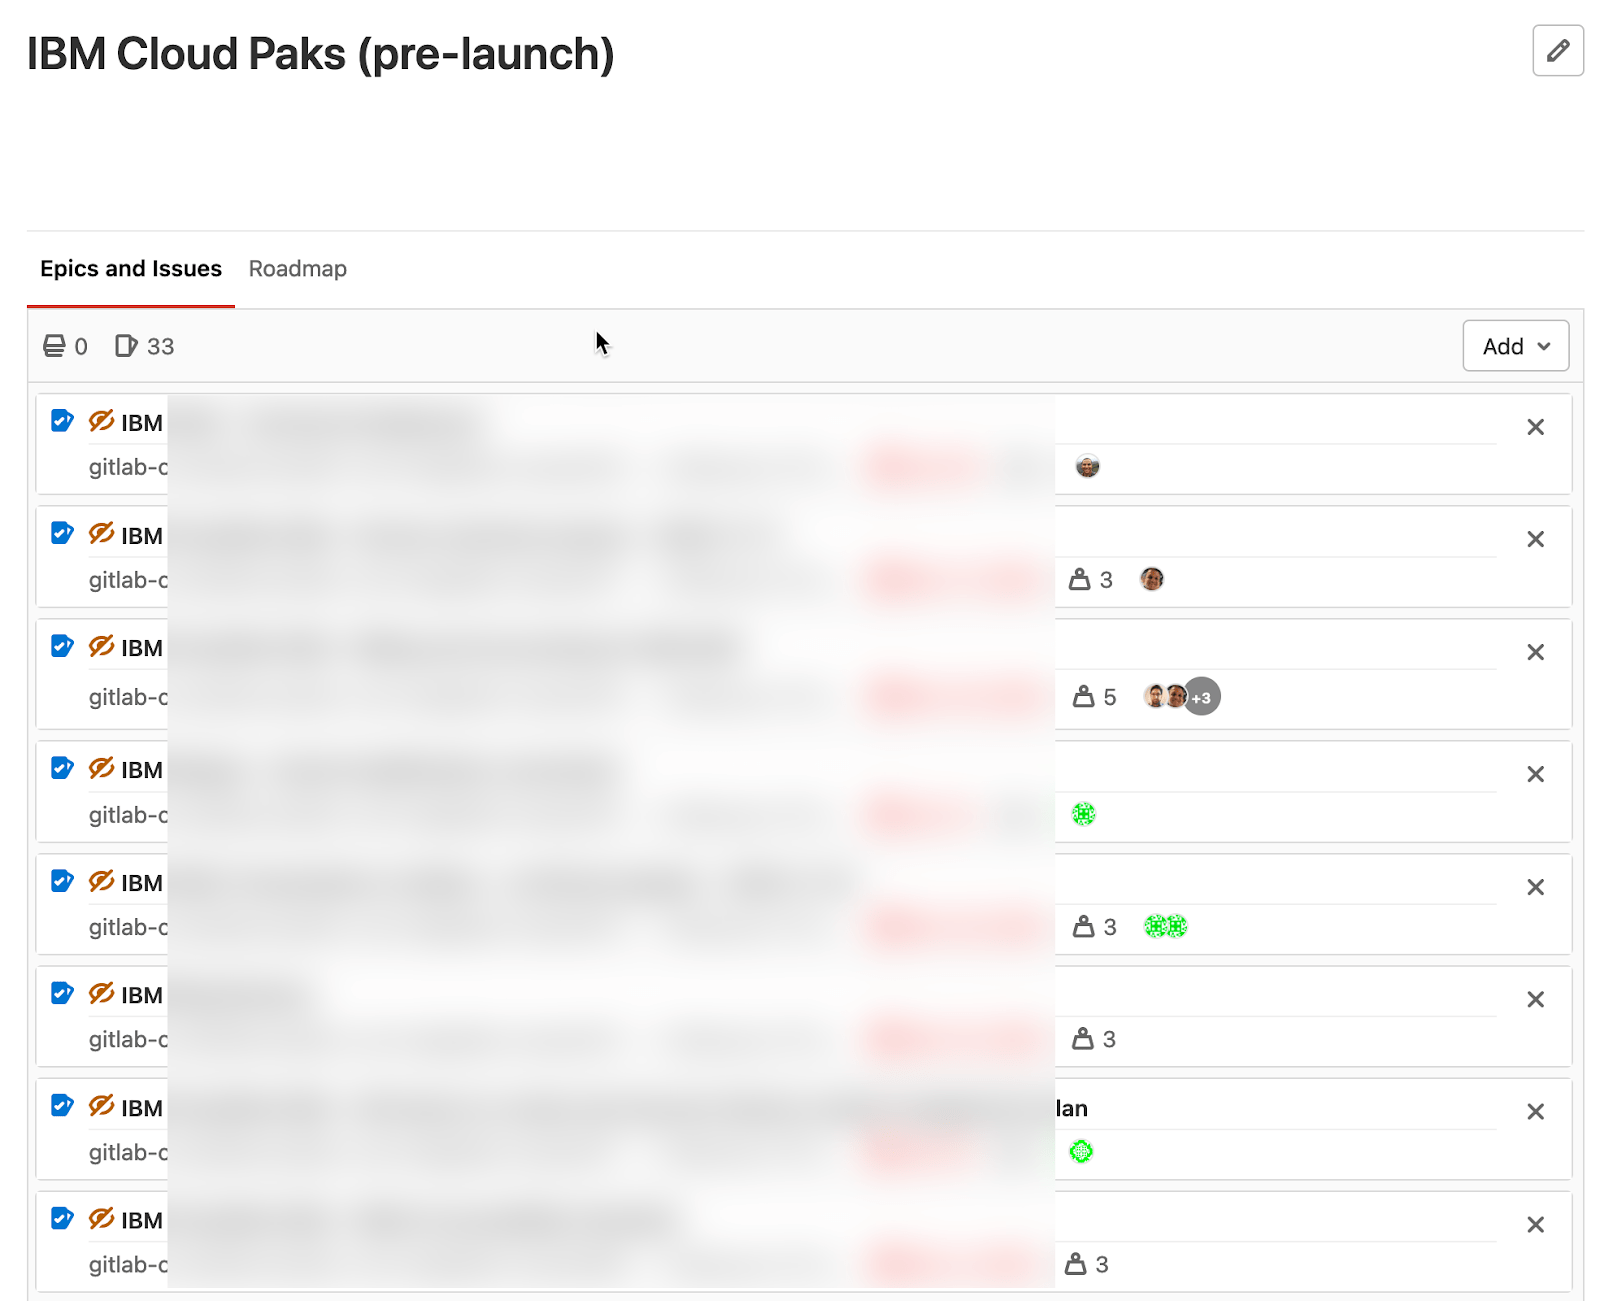 The list view shows inside the "IBM cloud paks: Pre-launch" epic are 33 issues